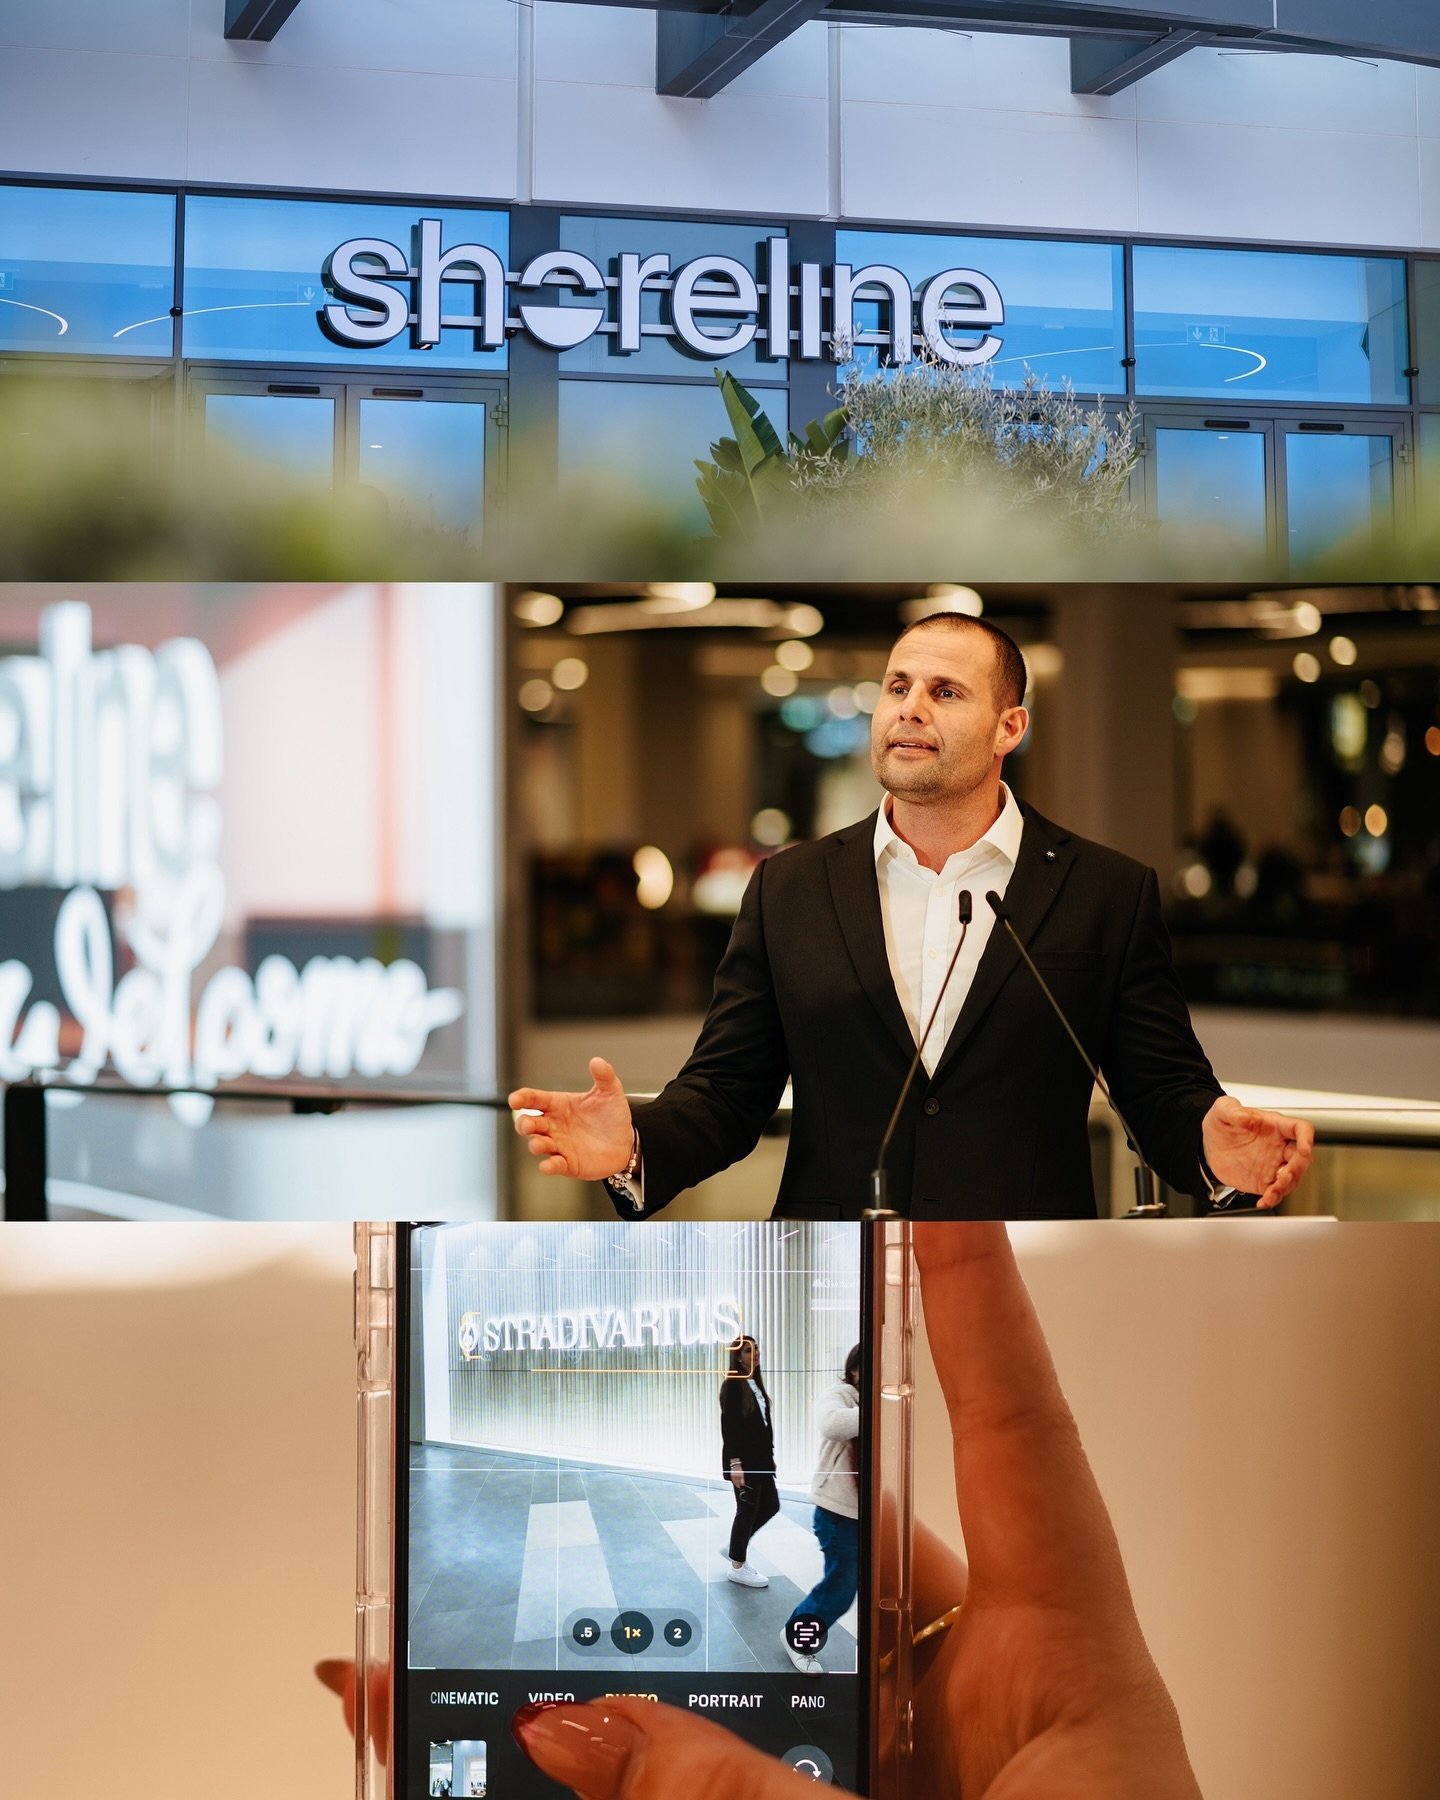 Shooting content at the newly opened Shoreline Mall @shoreline_mall 🛒📷 #Shoreline #Malta #thecreatives #content #photography #video